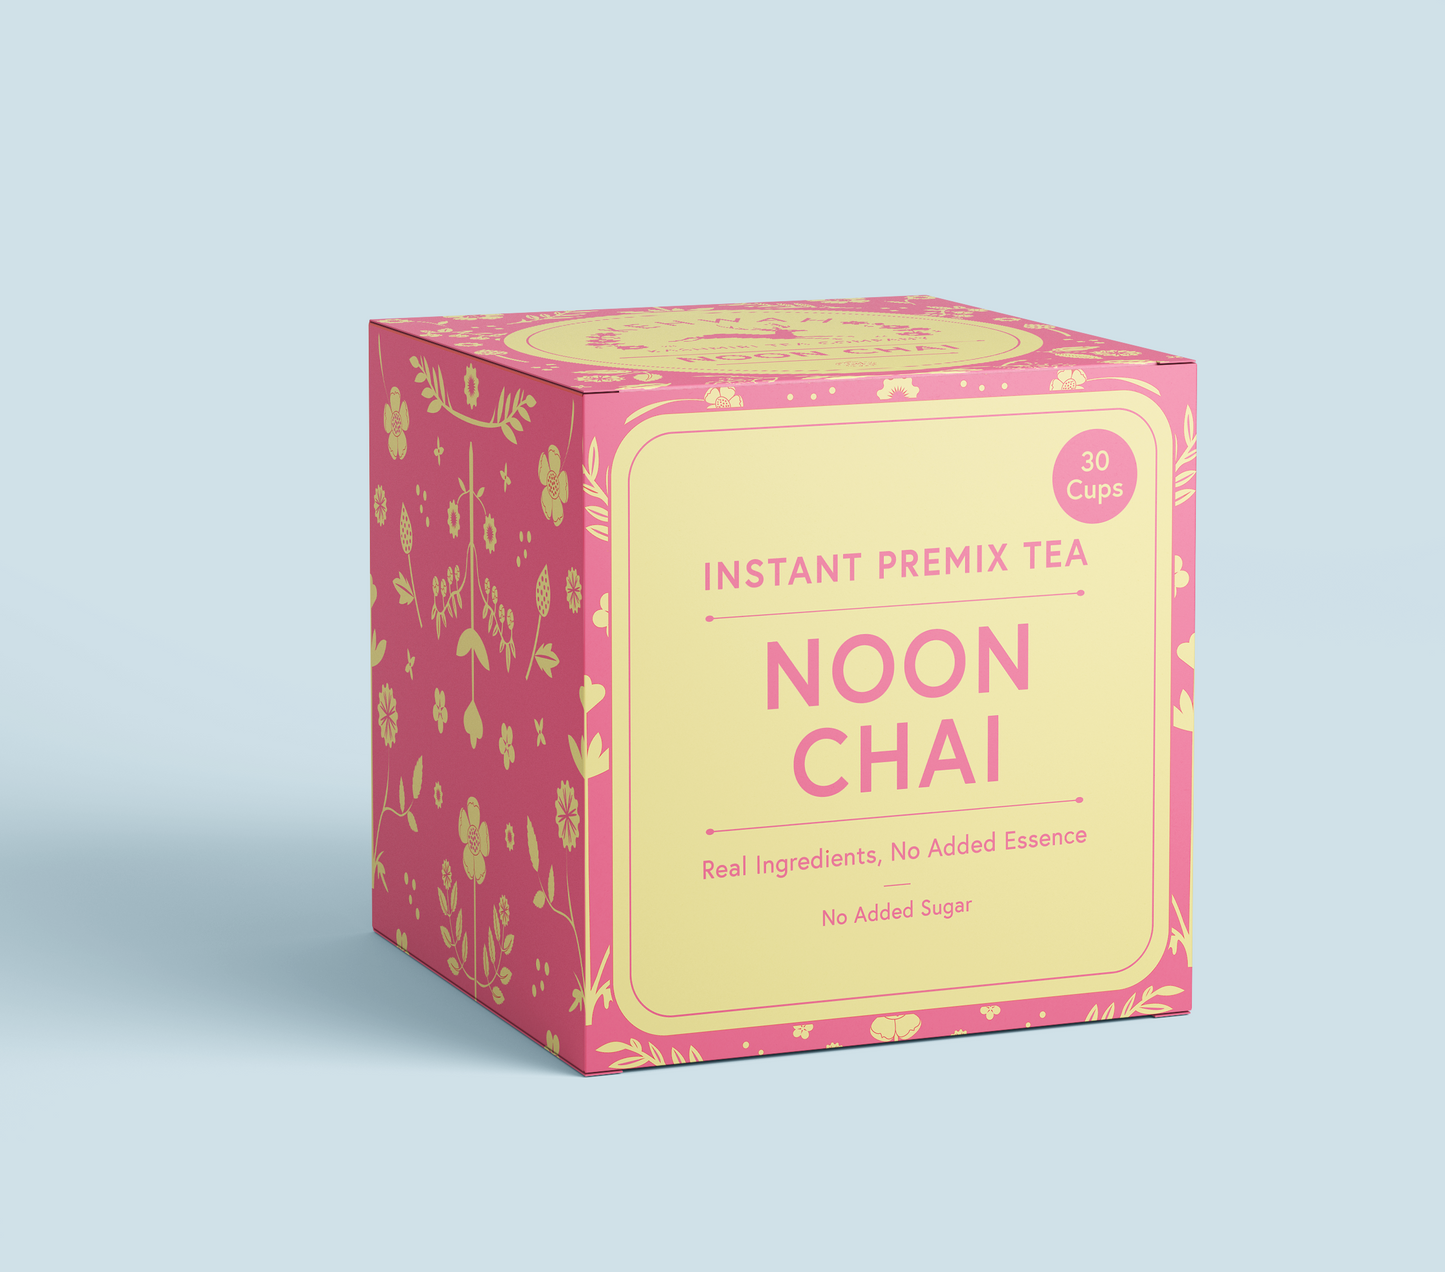 Kehwah Noon Chai Original Tea | 30 Cups | Includes Sheer-Chai Leaves, Cardamom, Cinnamon | Instant Mix Drink | Helps with Immunity, Digestion and Skin Glow | Kashmiri detox chai reduces bloating